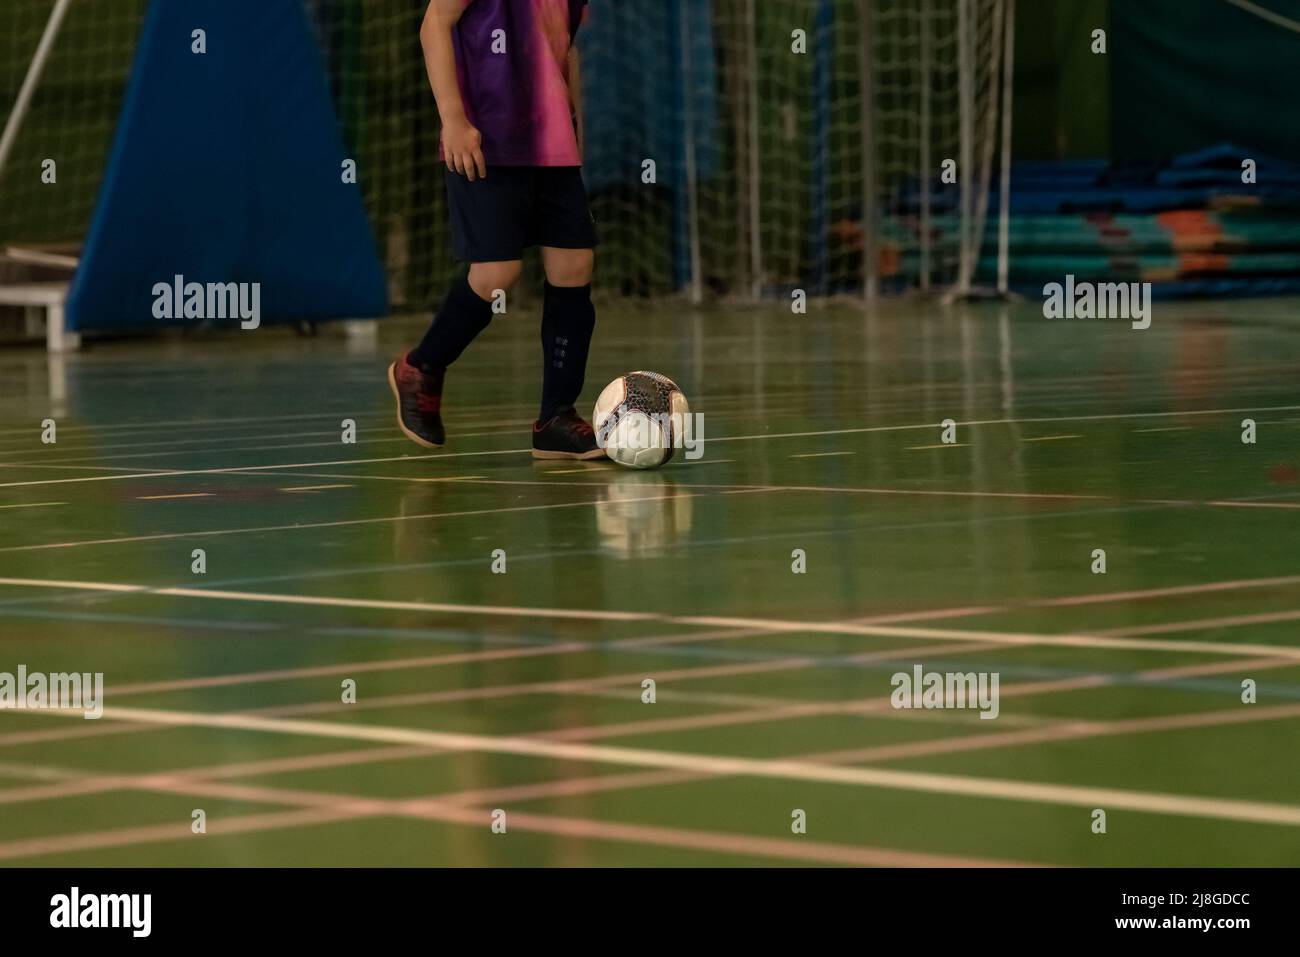 children indoor football player prepares to kick off from the centre of the pitch in spain Stock Photo